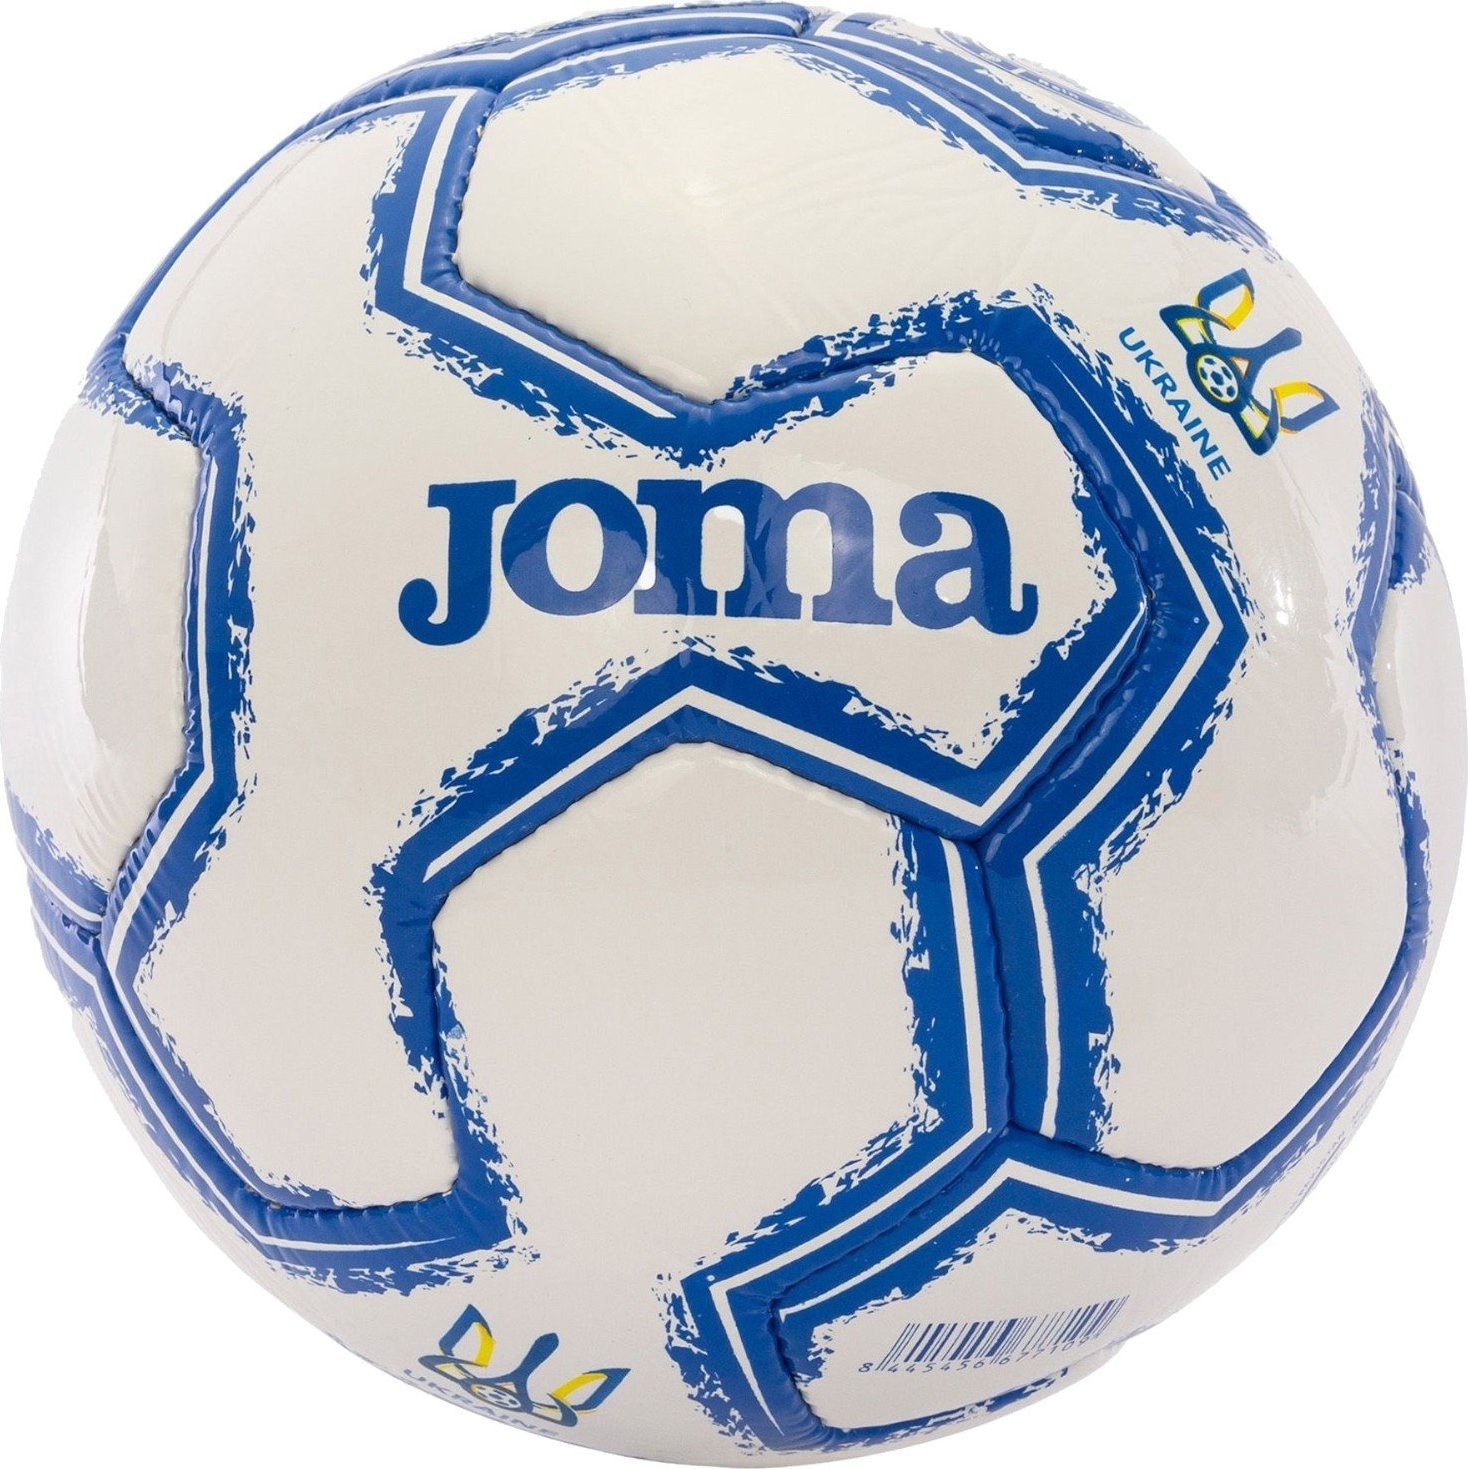 Joma Joma Official Football Federation Ukraine Ball AT400727C207 biale 5 AT400727C207 (8445456677109) bumba